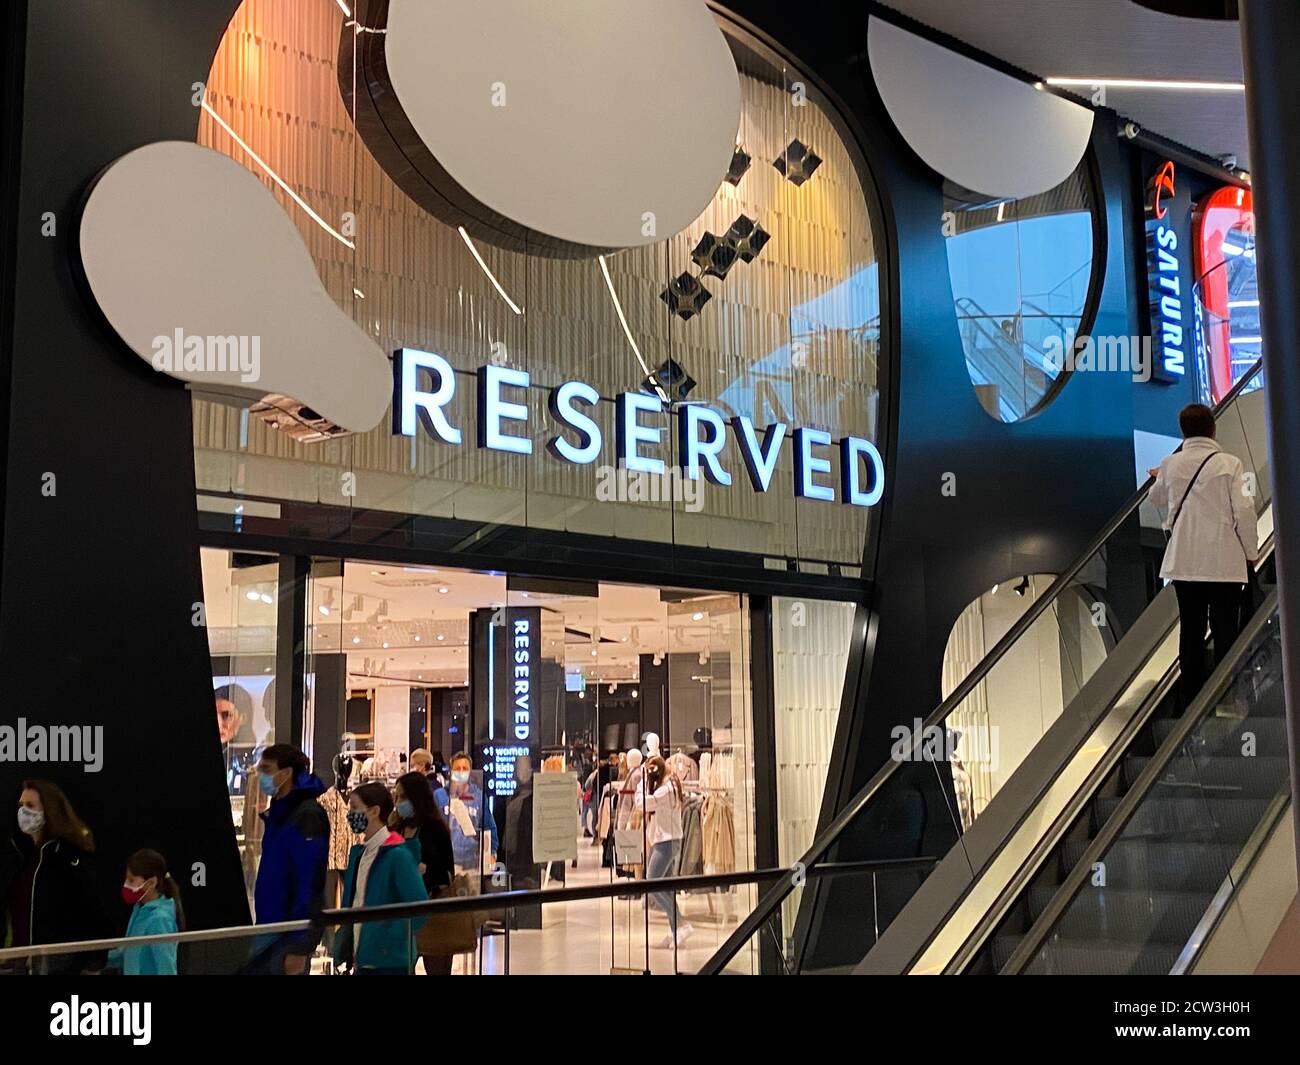 Monchengladbach, Germany - September 9. 2020: View on Reserved fashion  label company store front inside Minto shopping mall (focus on lettering  Stock Photo - Alamy